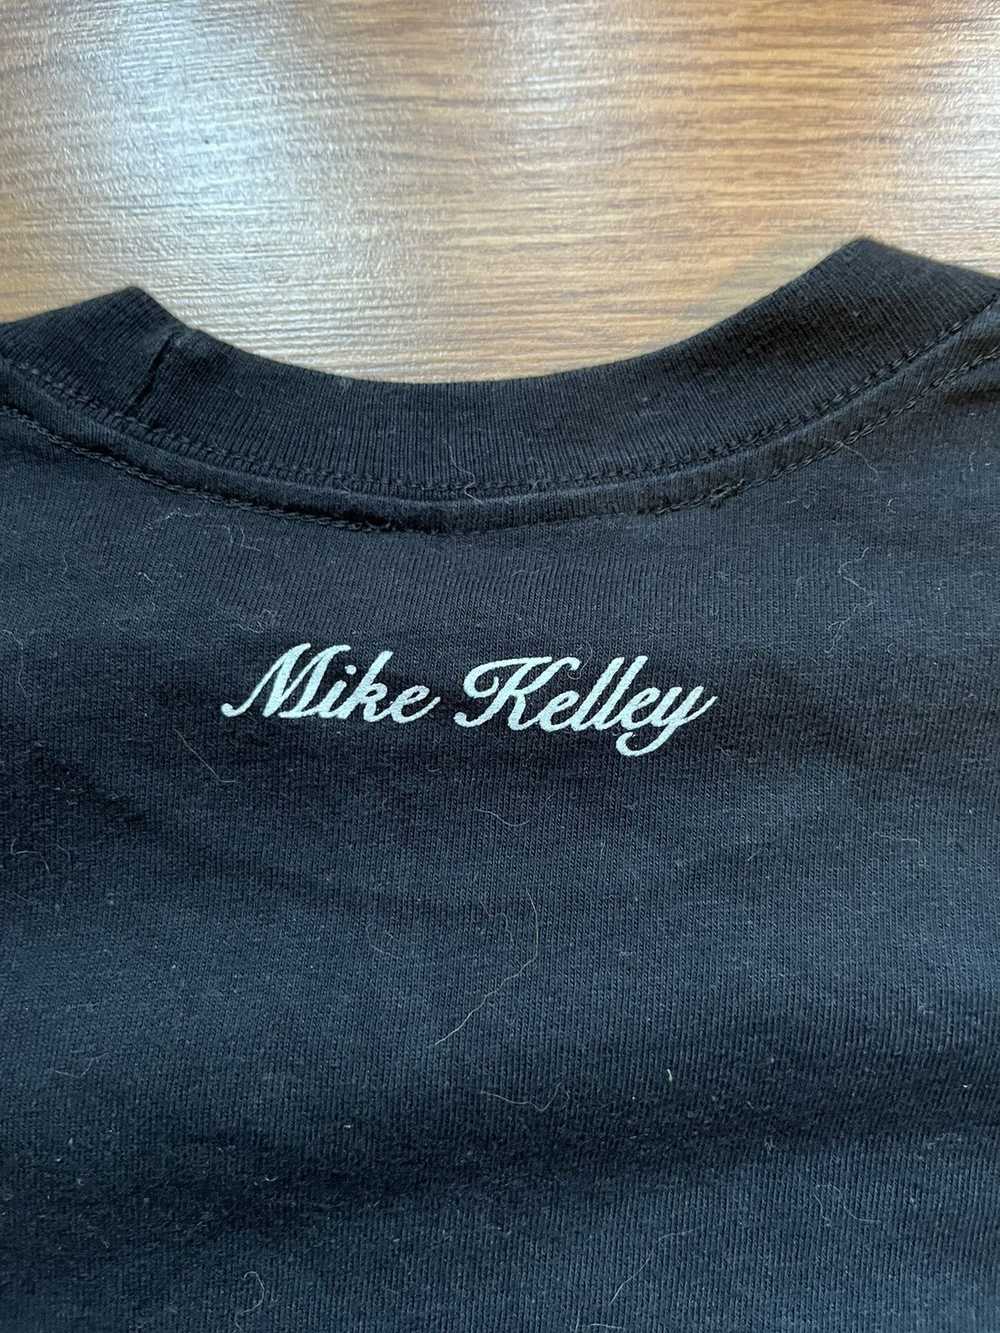 Supreme Mike Kelley The Empire State Building Tee - image 6